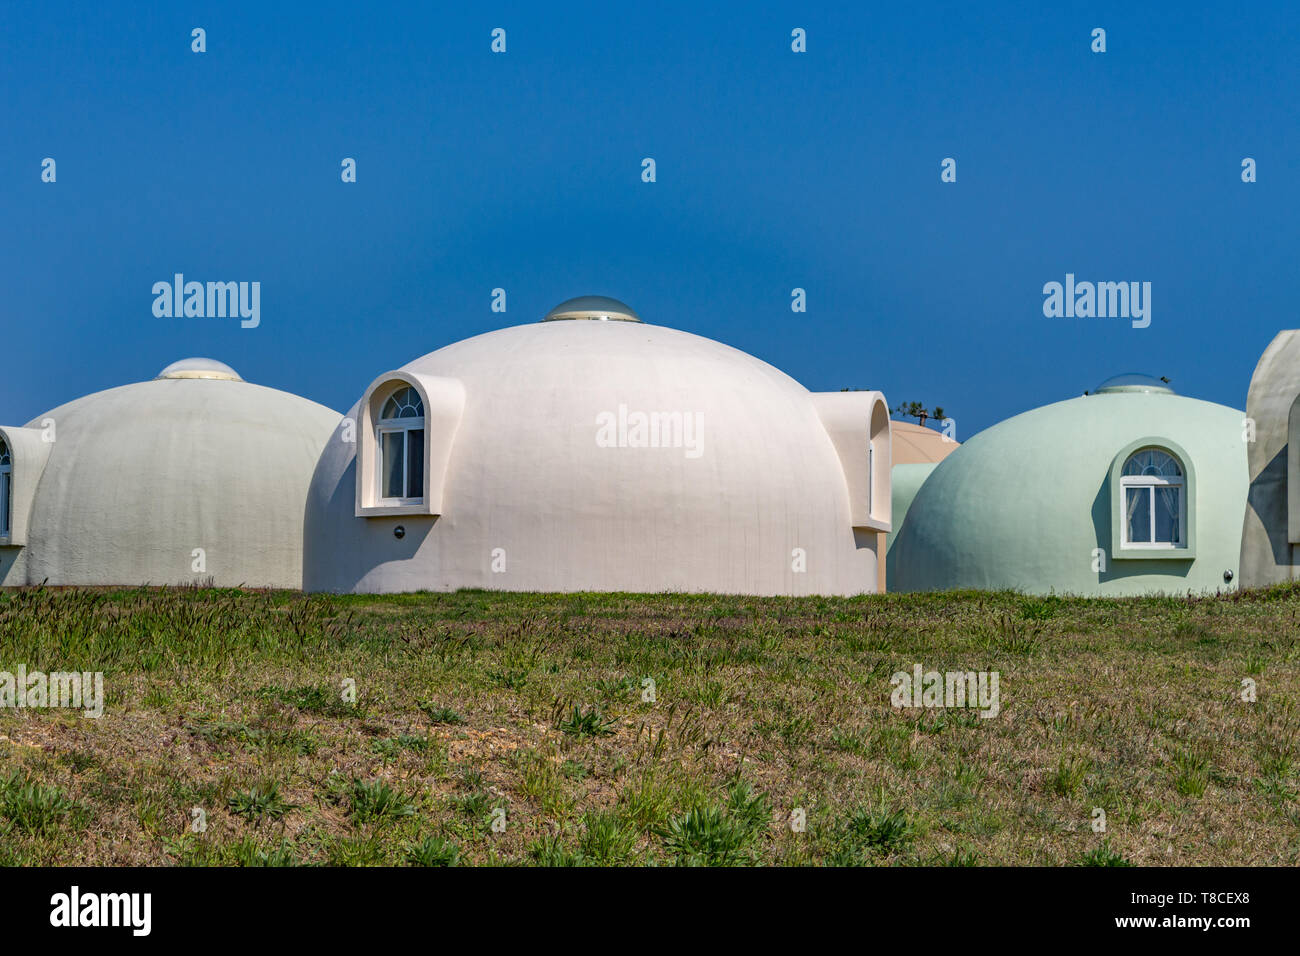 Dome houses, Kaga, Ishikawa Prefecture, Japan. Dome houses are assembled from prefabricated components. Stock Photo